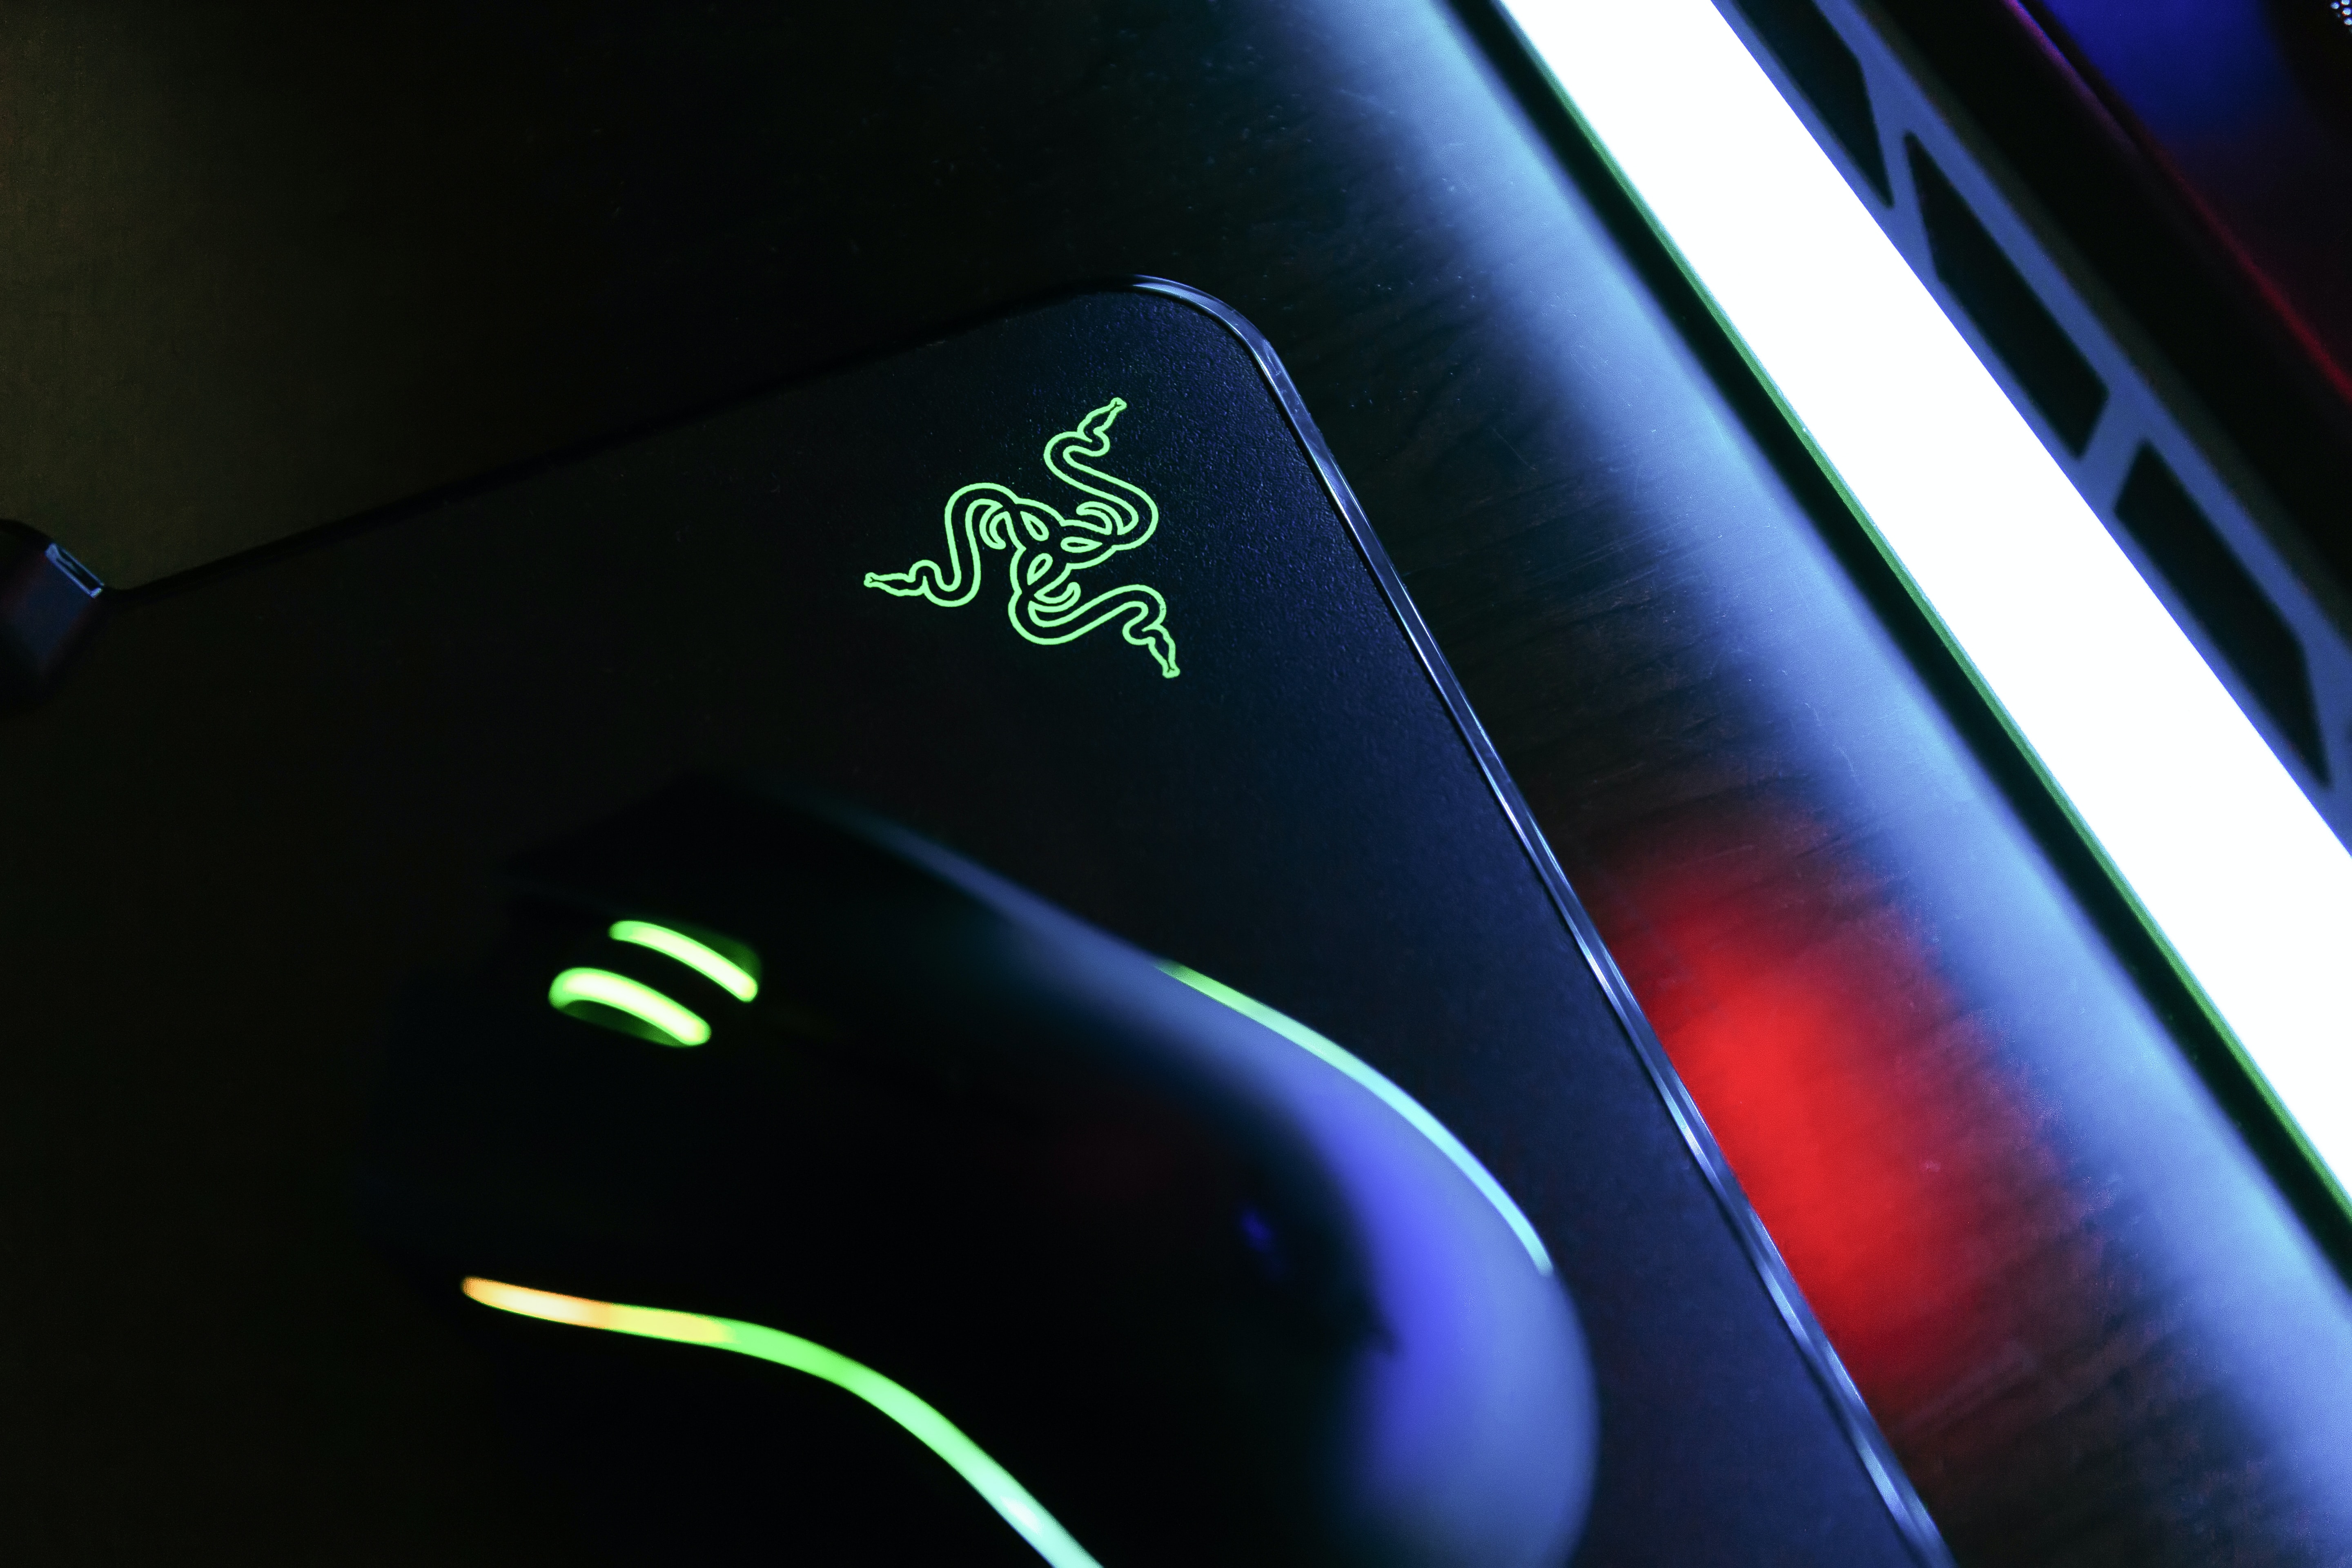 Razer Basilisk X Hyperspeed: Gaming Precision At An Affordable Price